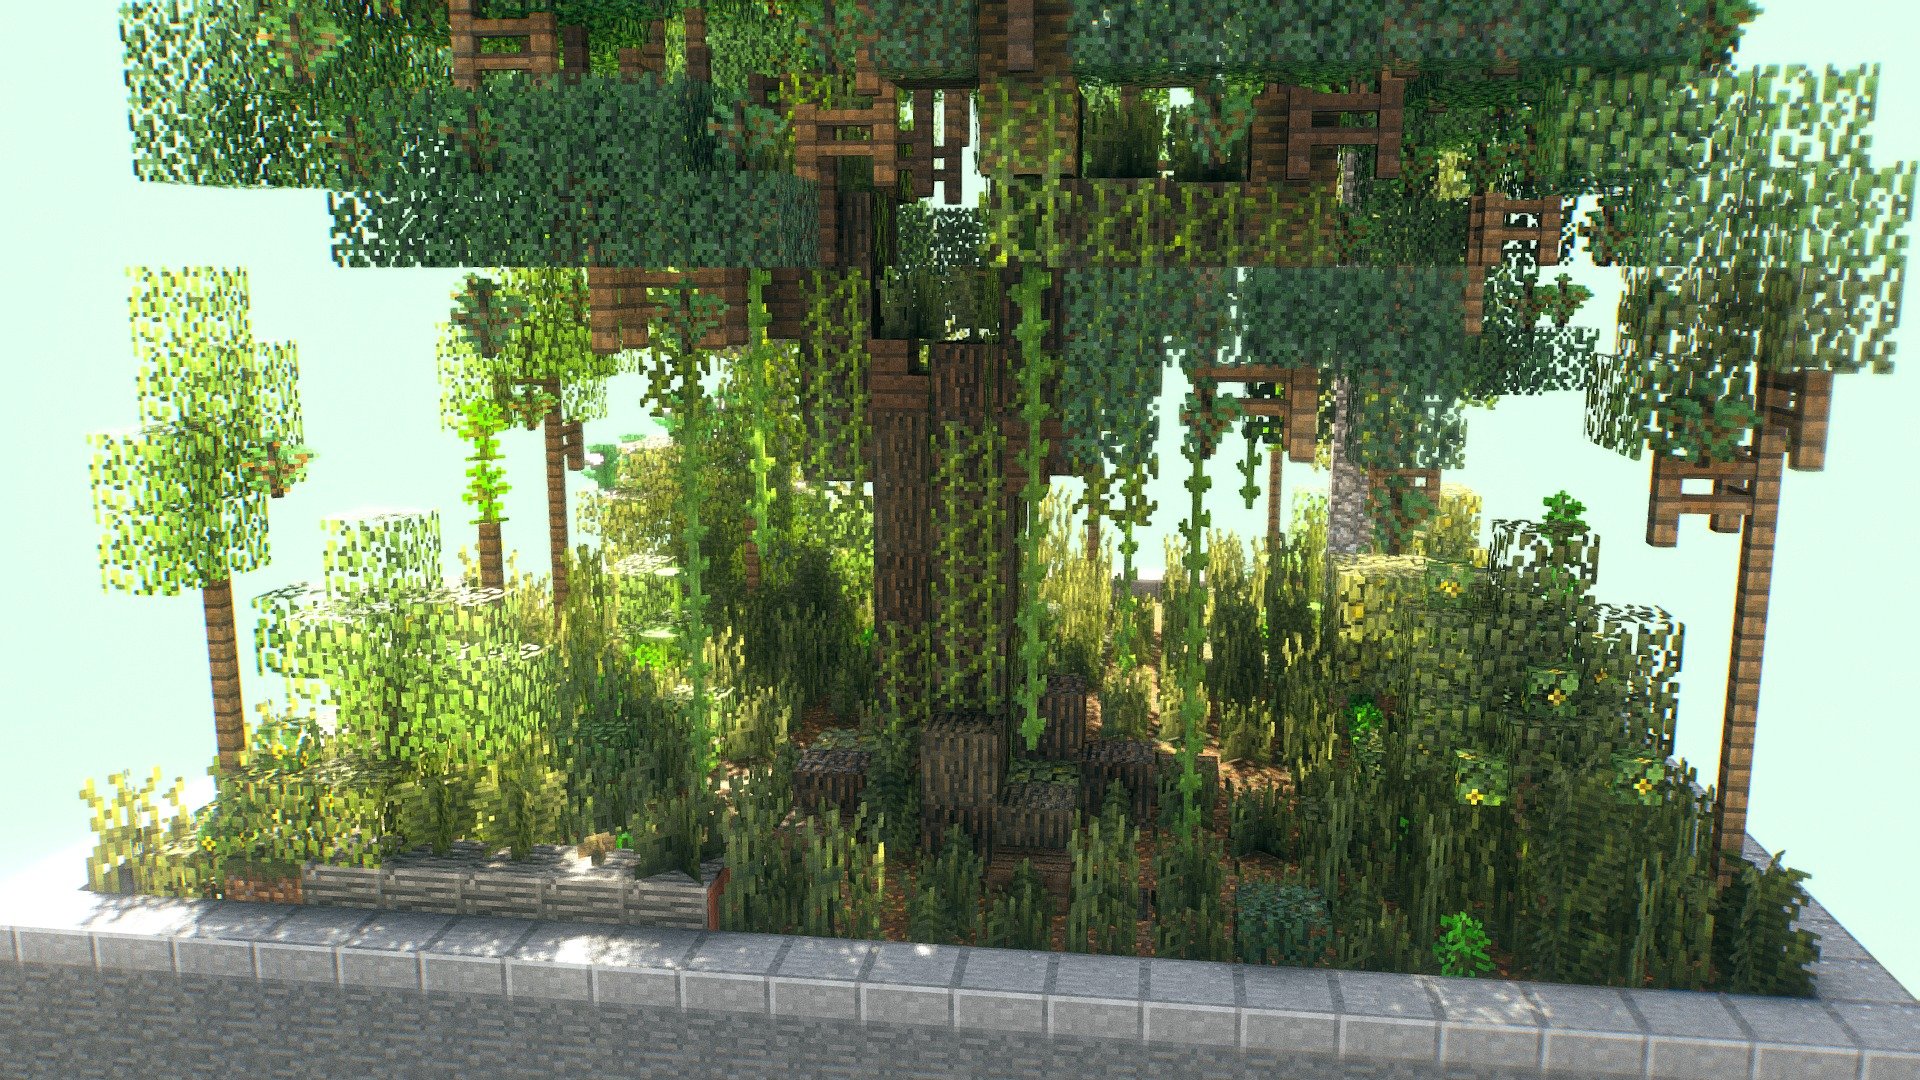 Made a separate vanilla minecraft build using similar technique on making trees and plants from my previous cambodian build. Wanted to share this to show how detailed forest can be without using any resourcepacks and mods.

&nbsp;

Used a lot of floating / combined plants for detailing. And also some biome coloring for green color variations (doesn't show on this preview, but ingame)

&nbsp;

Also testing out realistic plant shading in sketchfab (using minecraft lol)


Map download (1.12.2) :
http://www.mediafire.com/file/ji81huvq8bfidki


Minecraft, WorldEdit, MCEdit for map making and clean up

Mineways for model export

3ds Max for making second set of UV, and AO texture baking - Forest Demo - Download Free 3D model by patrix 3d model